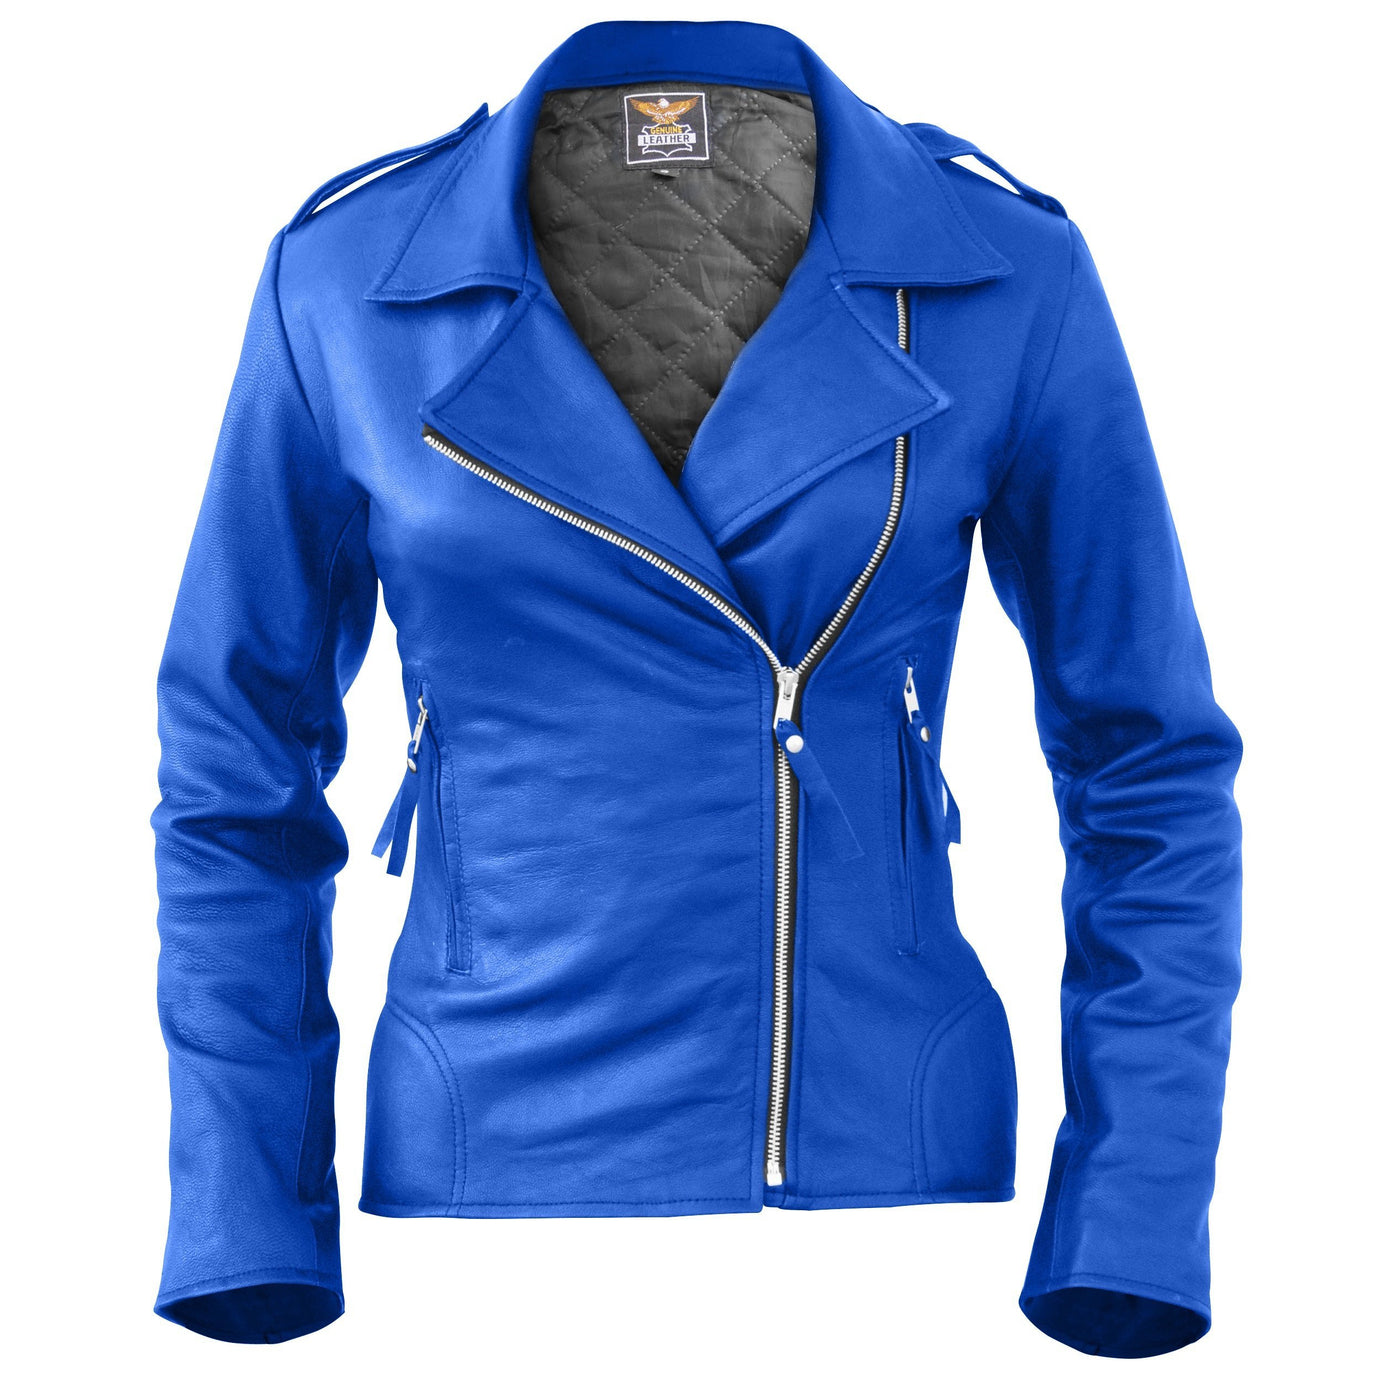 Leather Blue Jackets for Men & Women | Genuine Jackets by LSS - Leather ...